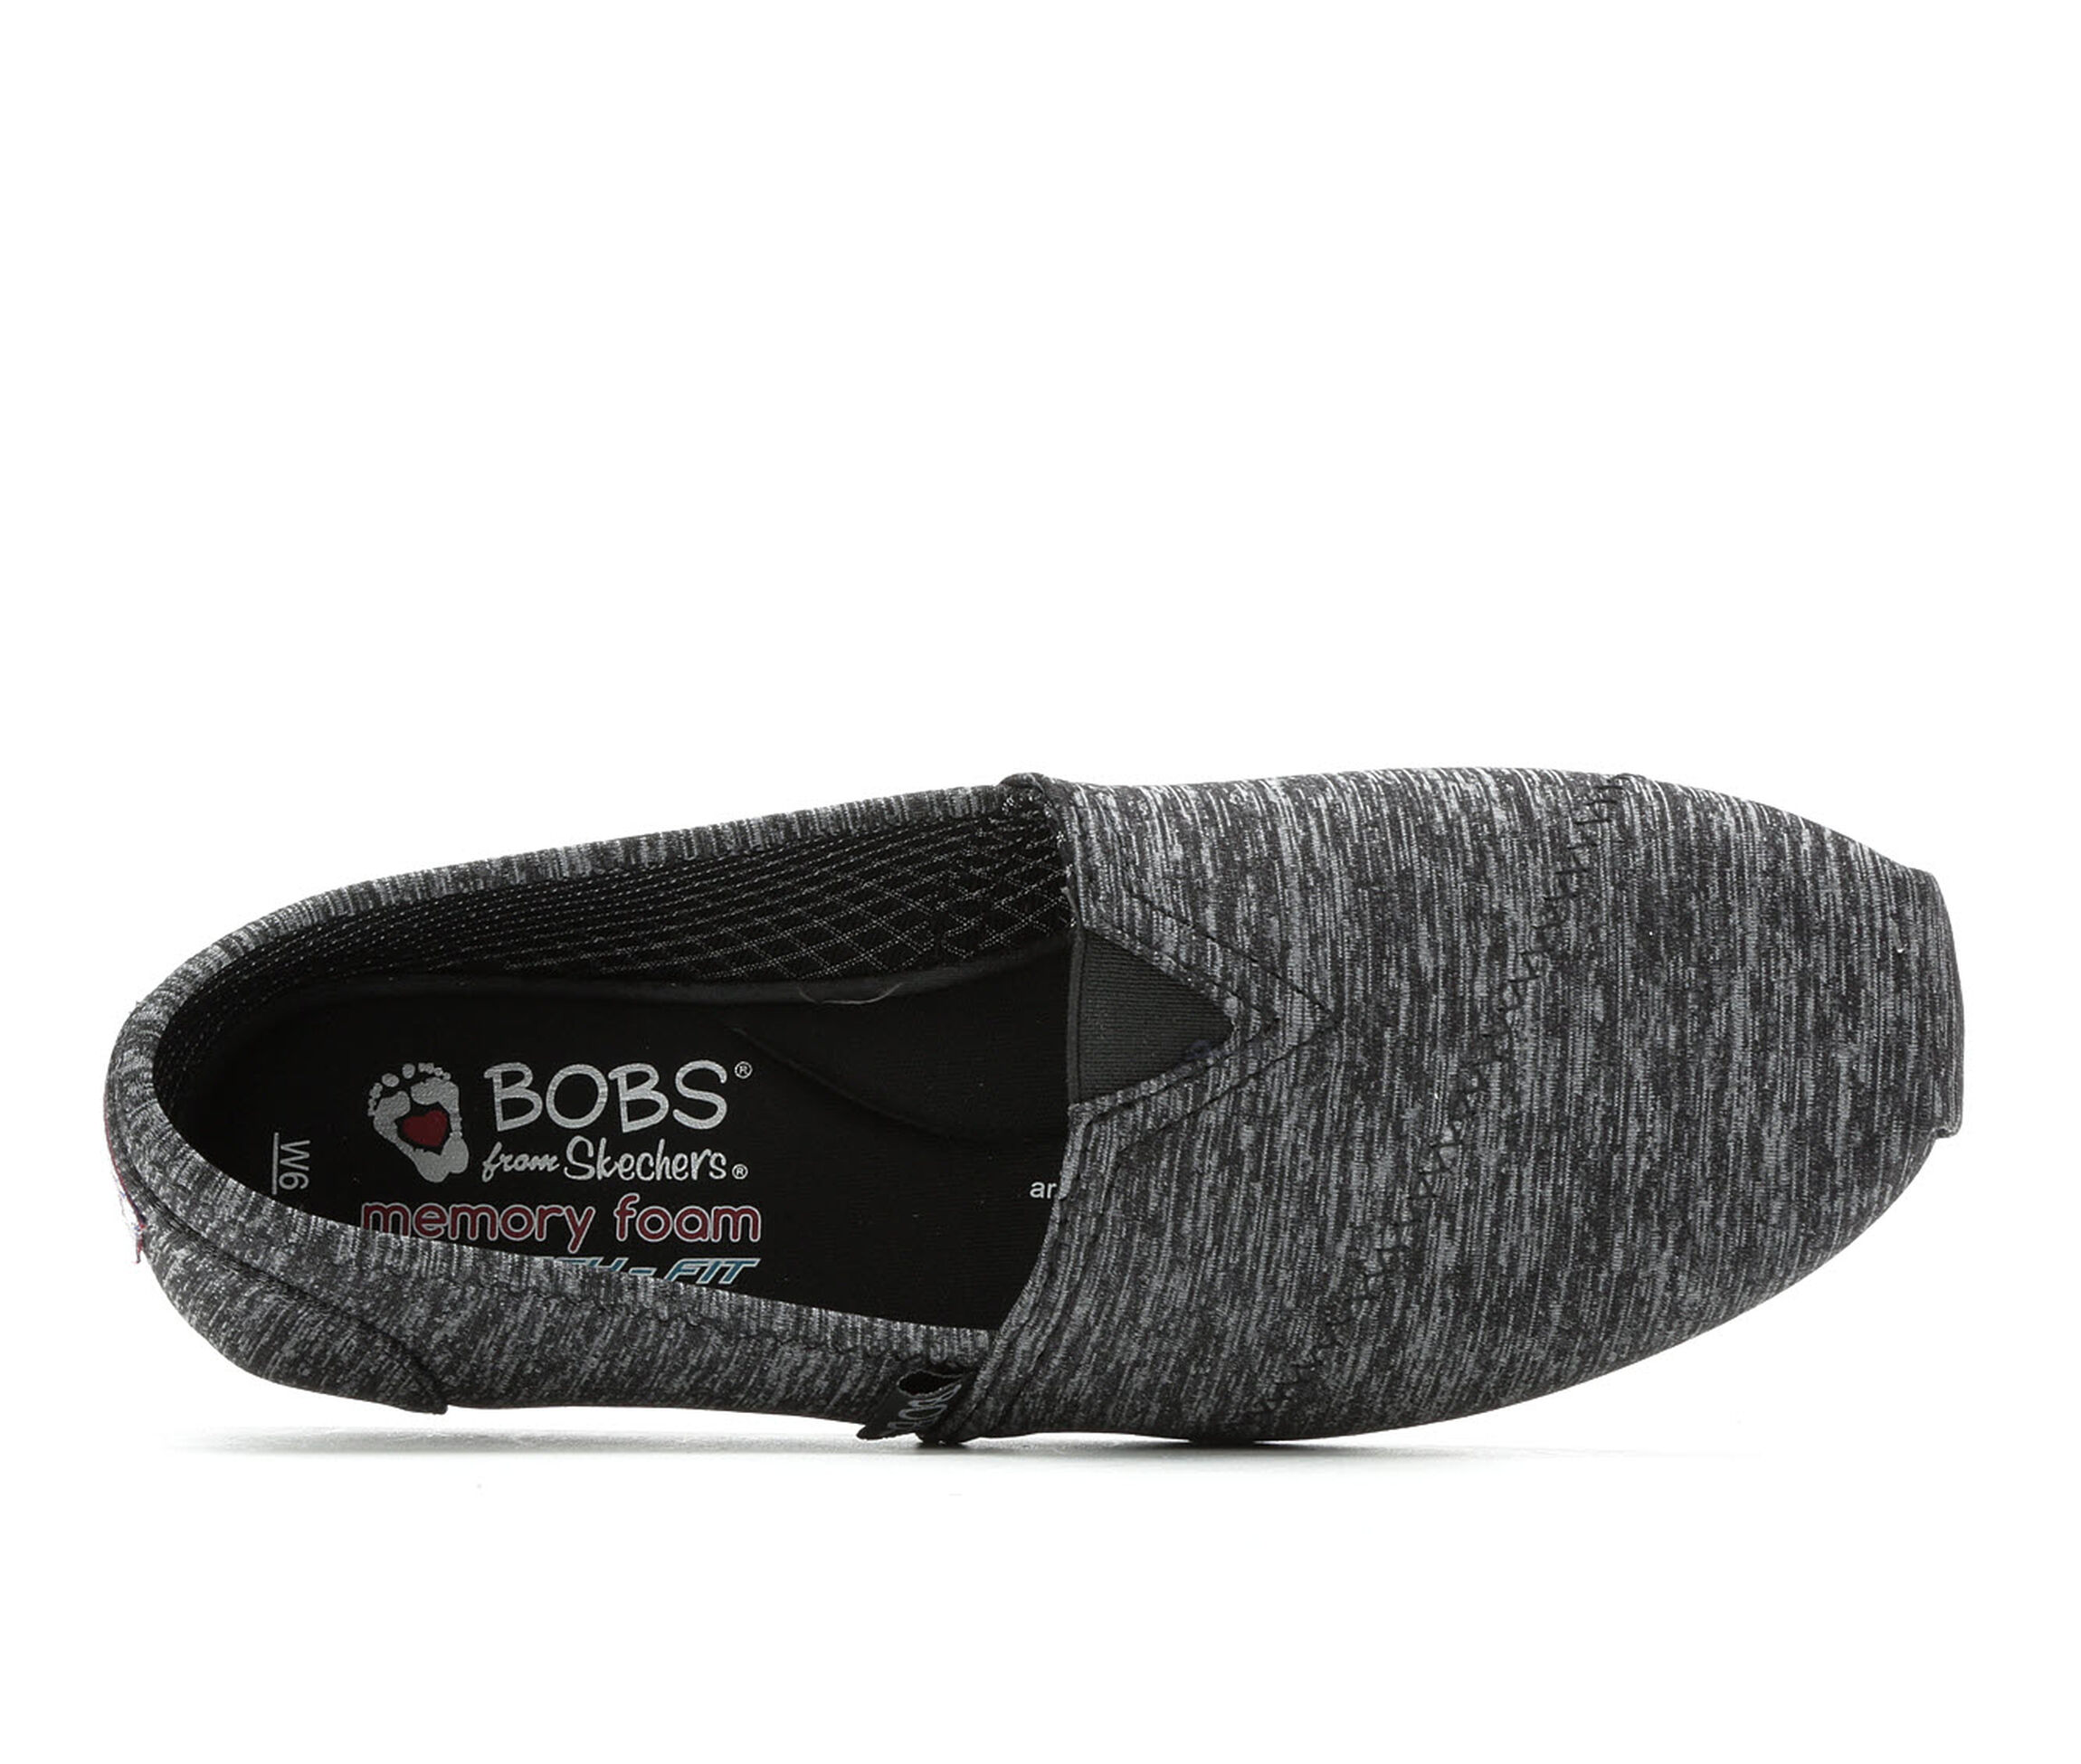 BOBS Shoes & Sneakers | Shoe Carnival